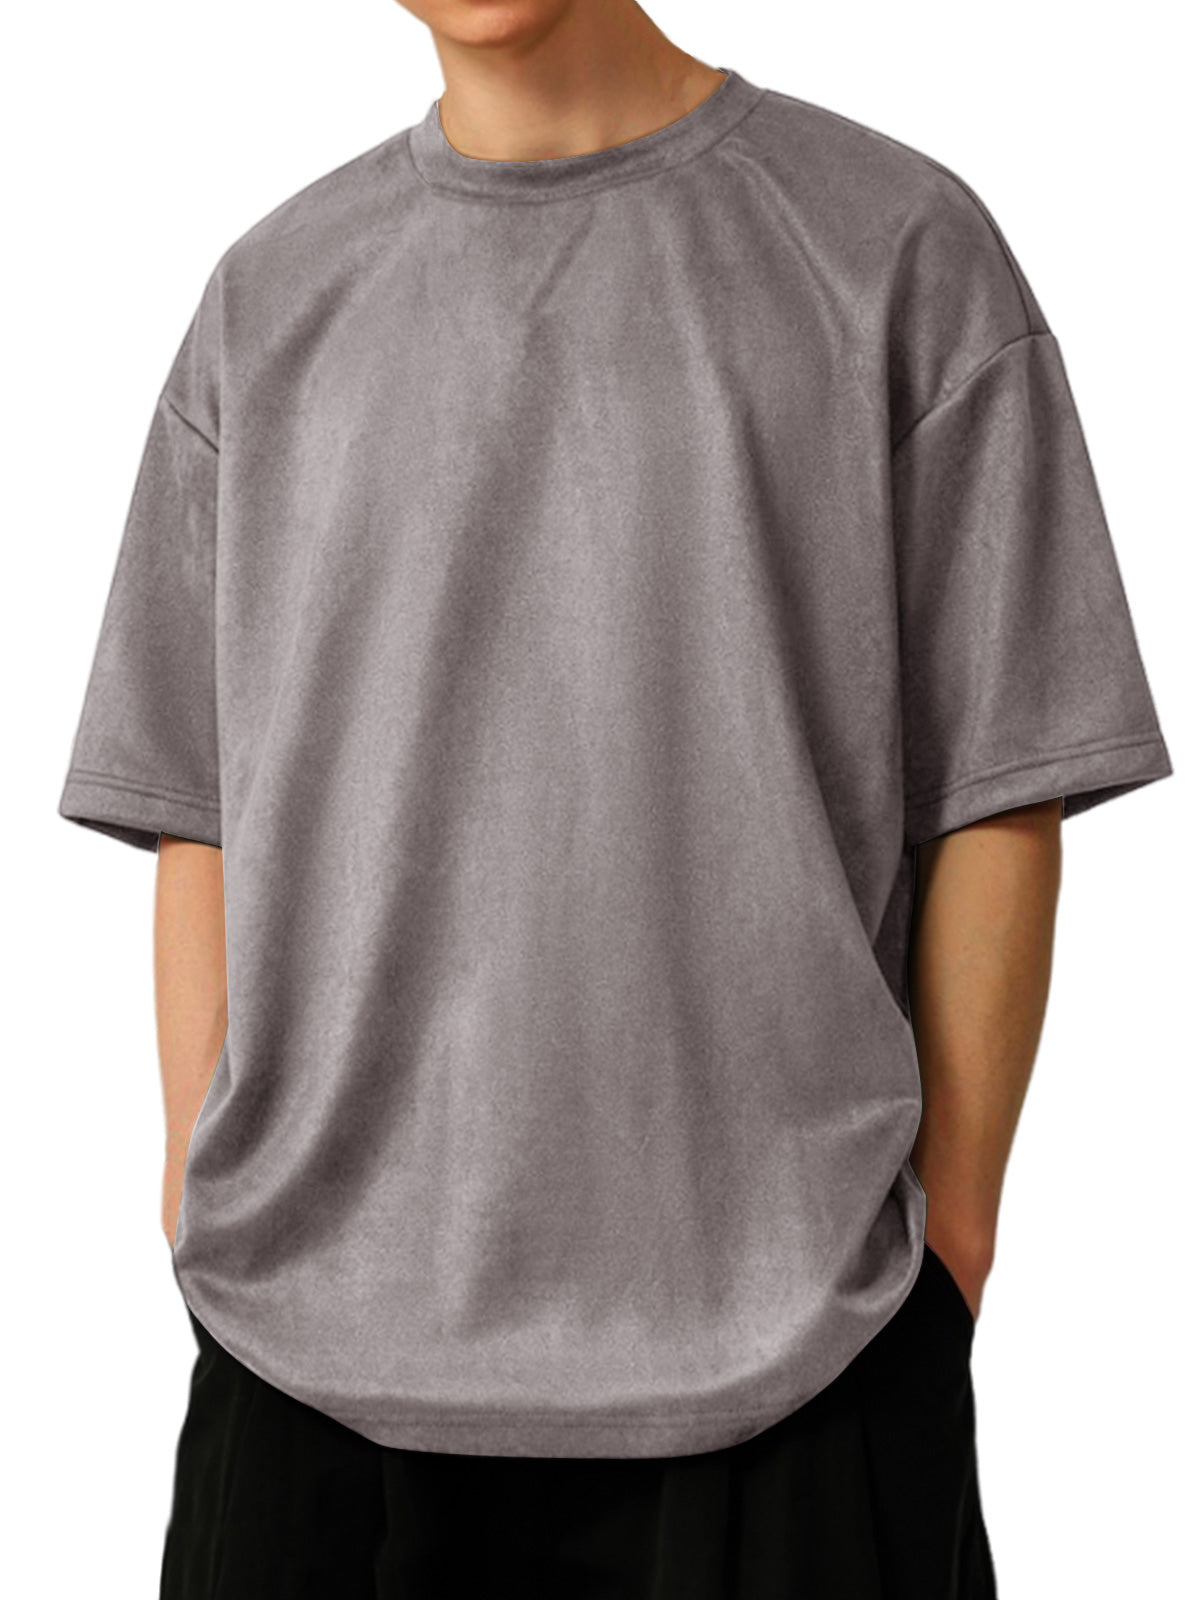 Men's Solid Color Round Neck Suede Short Sleeve T-Shirt